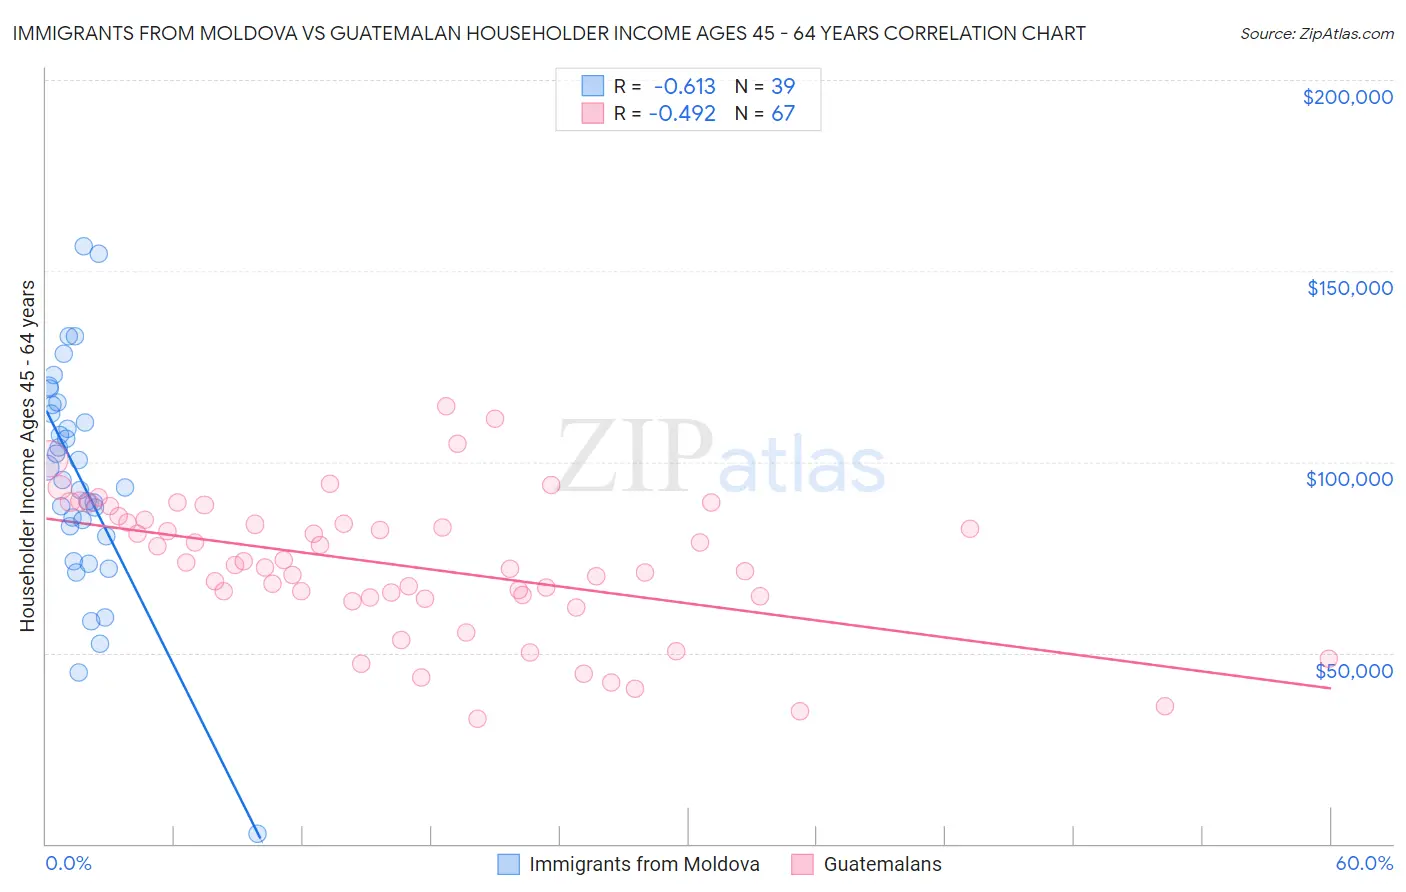 Immigrants from Moldova vs Guatemalan Householder Income Ages 45 - 64 years